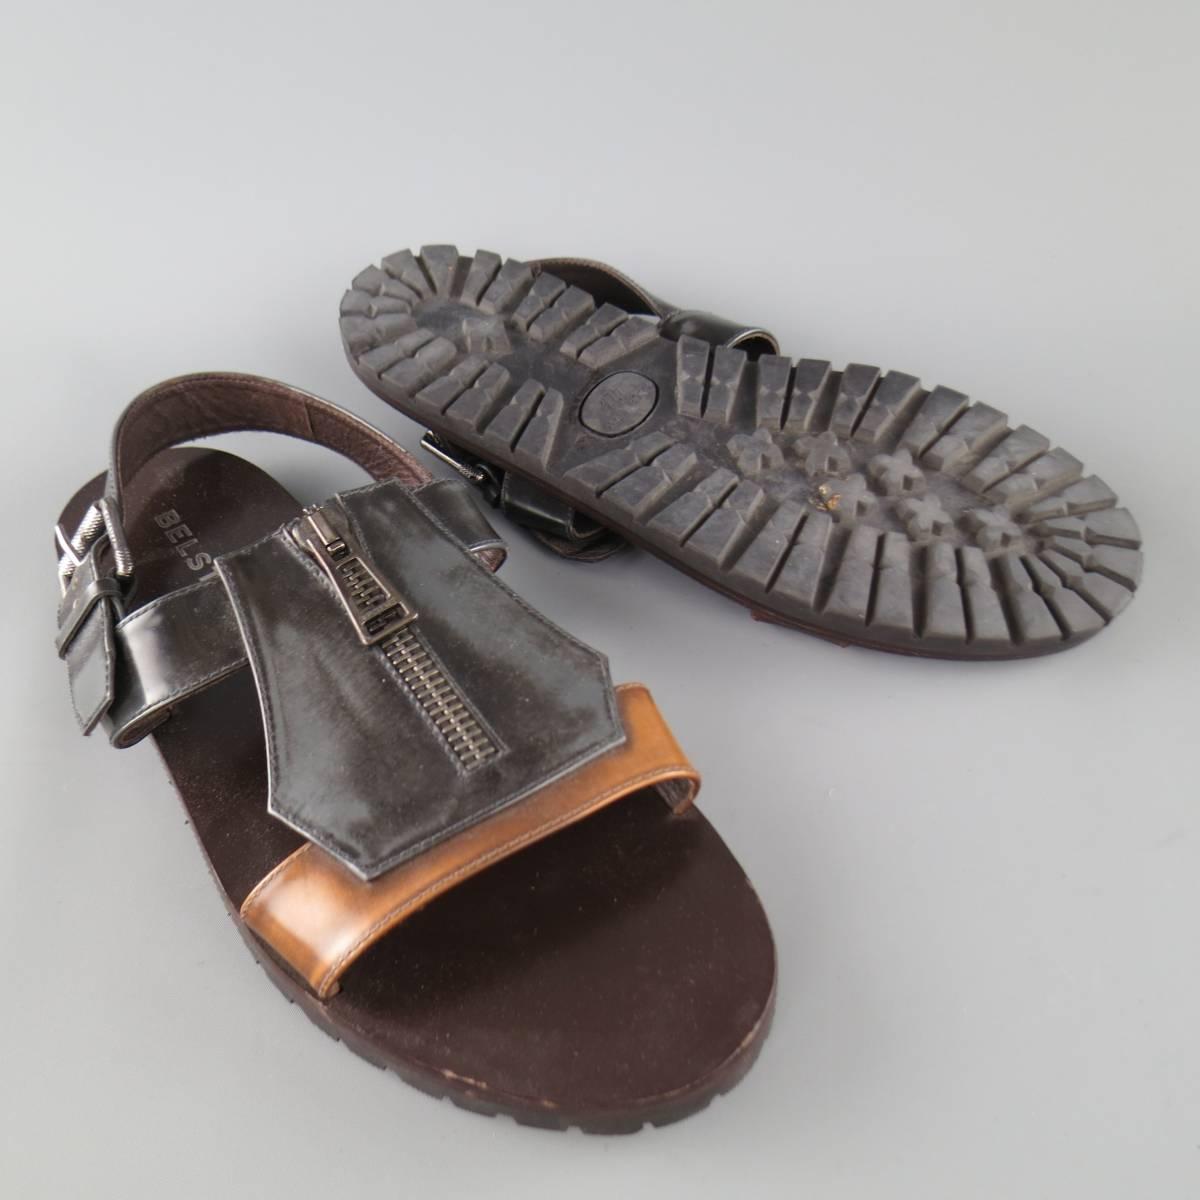 Gray Men's BELSTAFF Size 9.5 Black & Brown Two Toned Patent Leather Zip Sandals